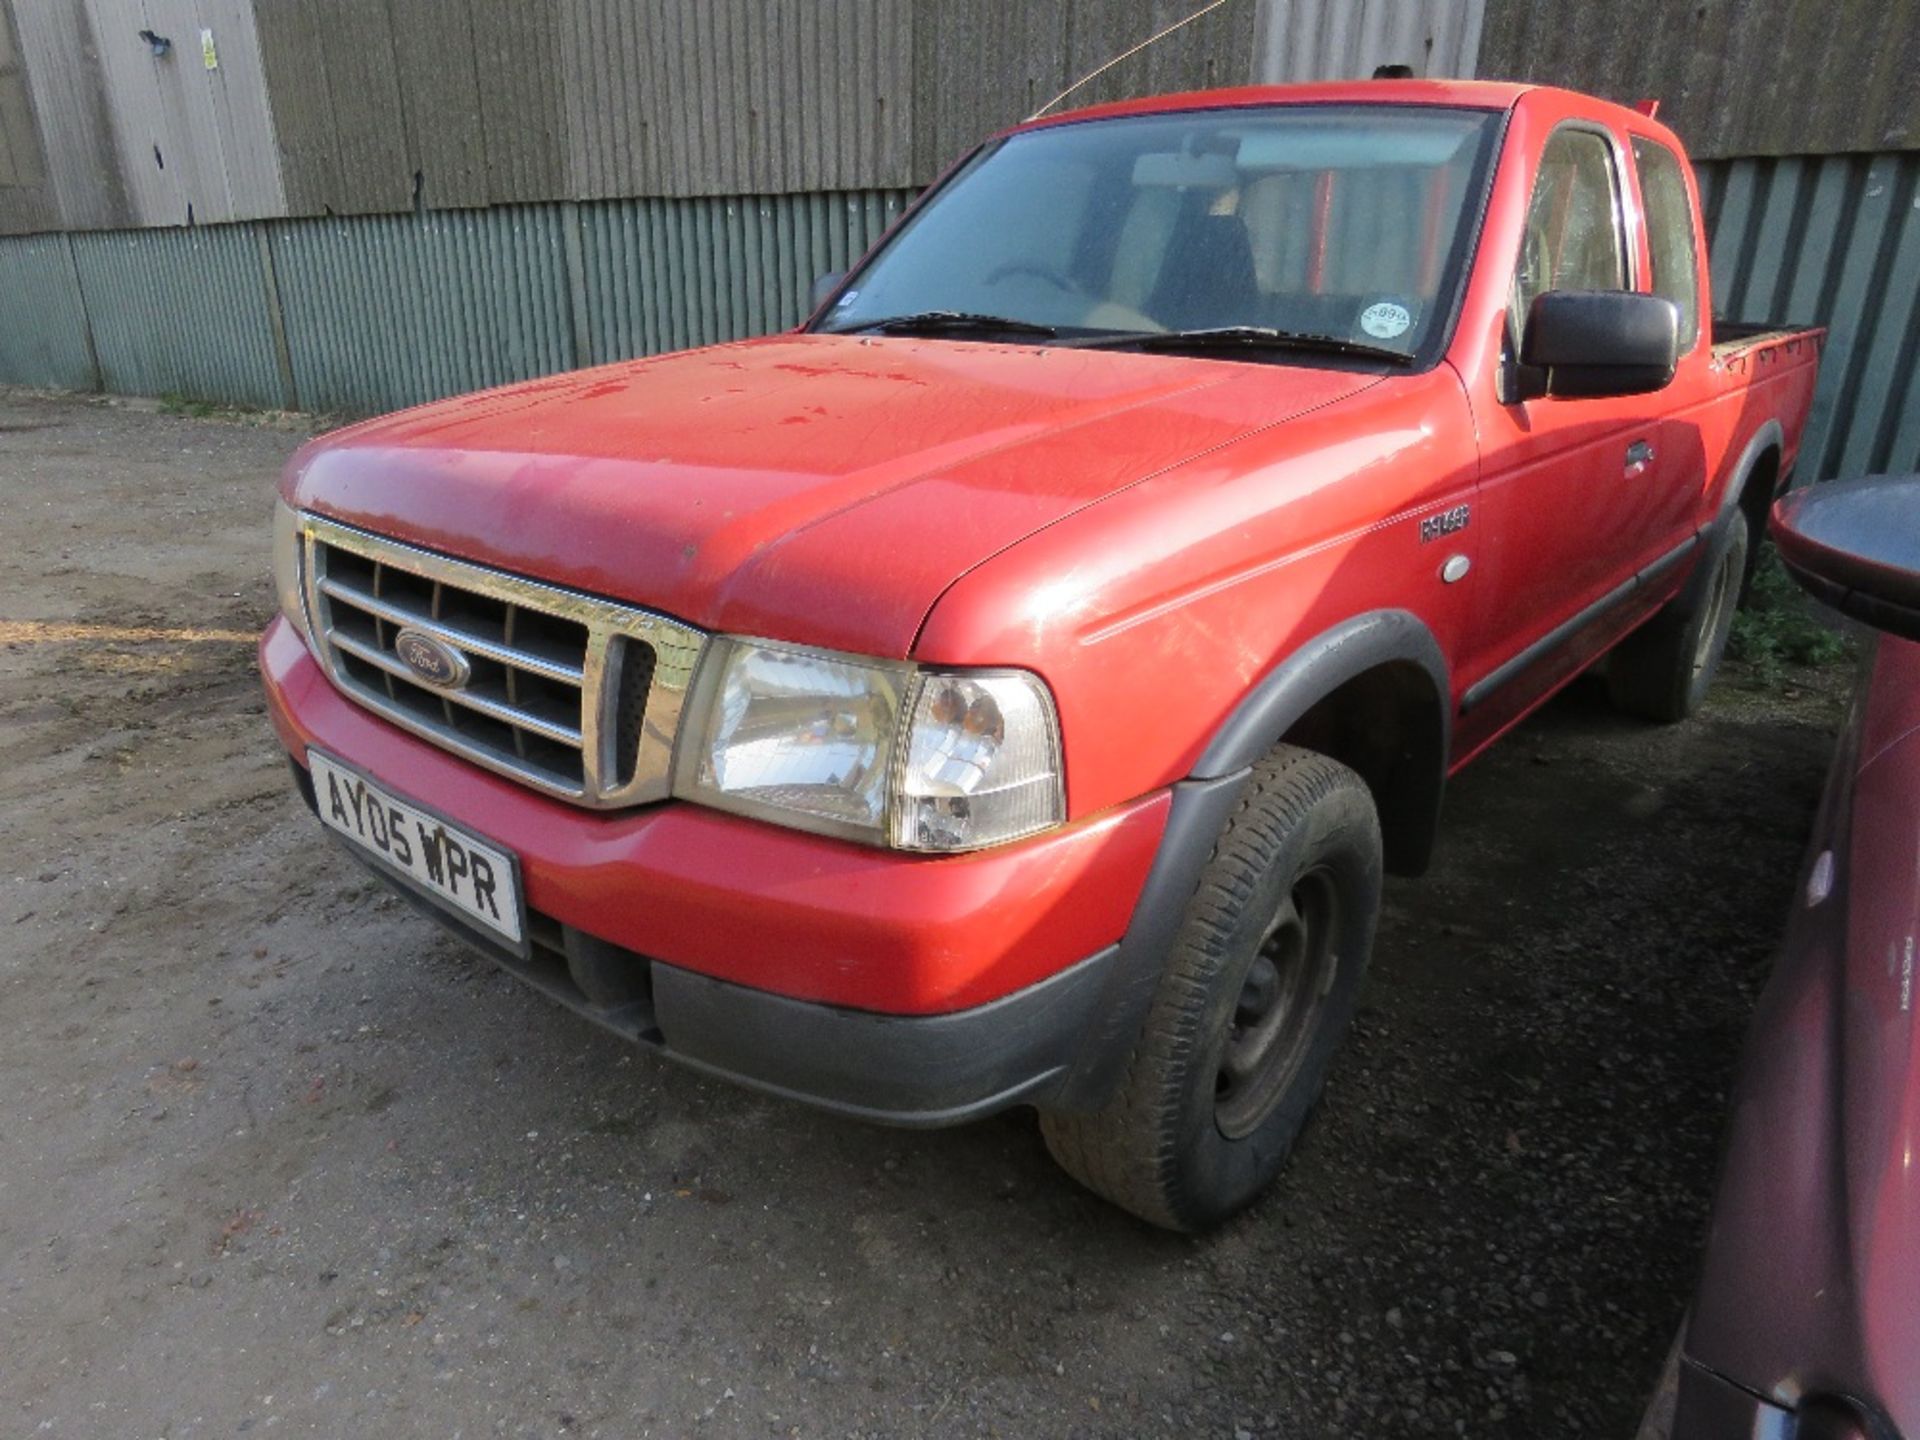 FORD RANGER KING CAB PICKUP TRUCK REG:AY05 WPR. MANUAL GEARBOX. 106,448 REC MILES. DIRECT FROM LOCAL